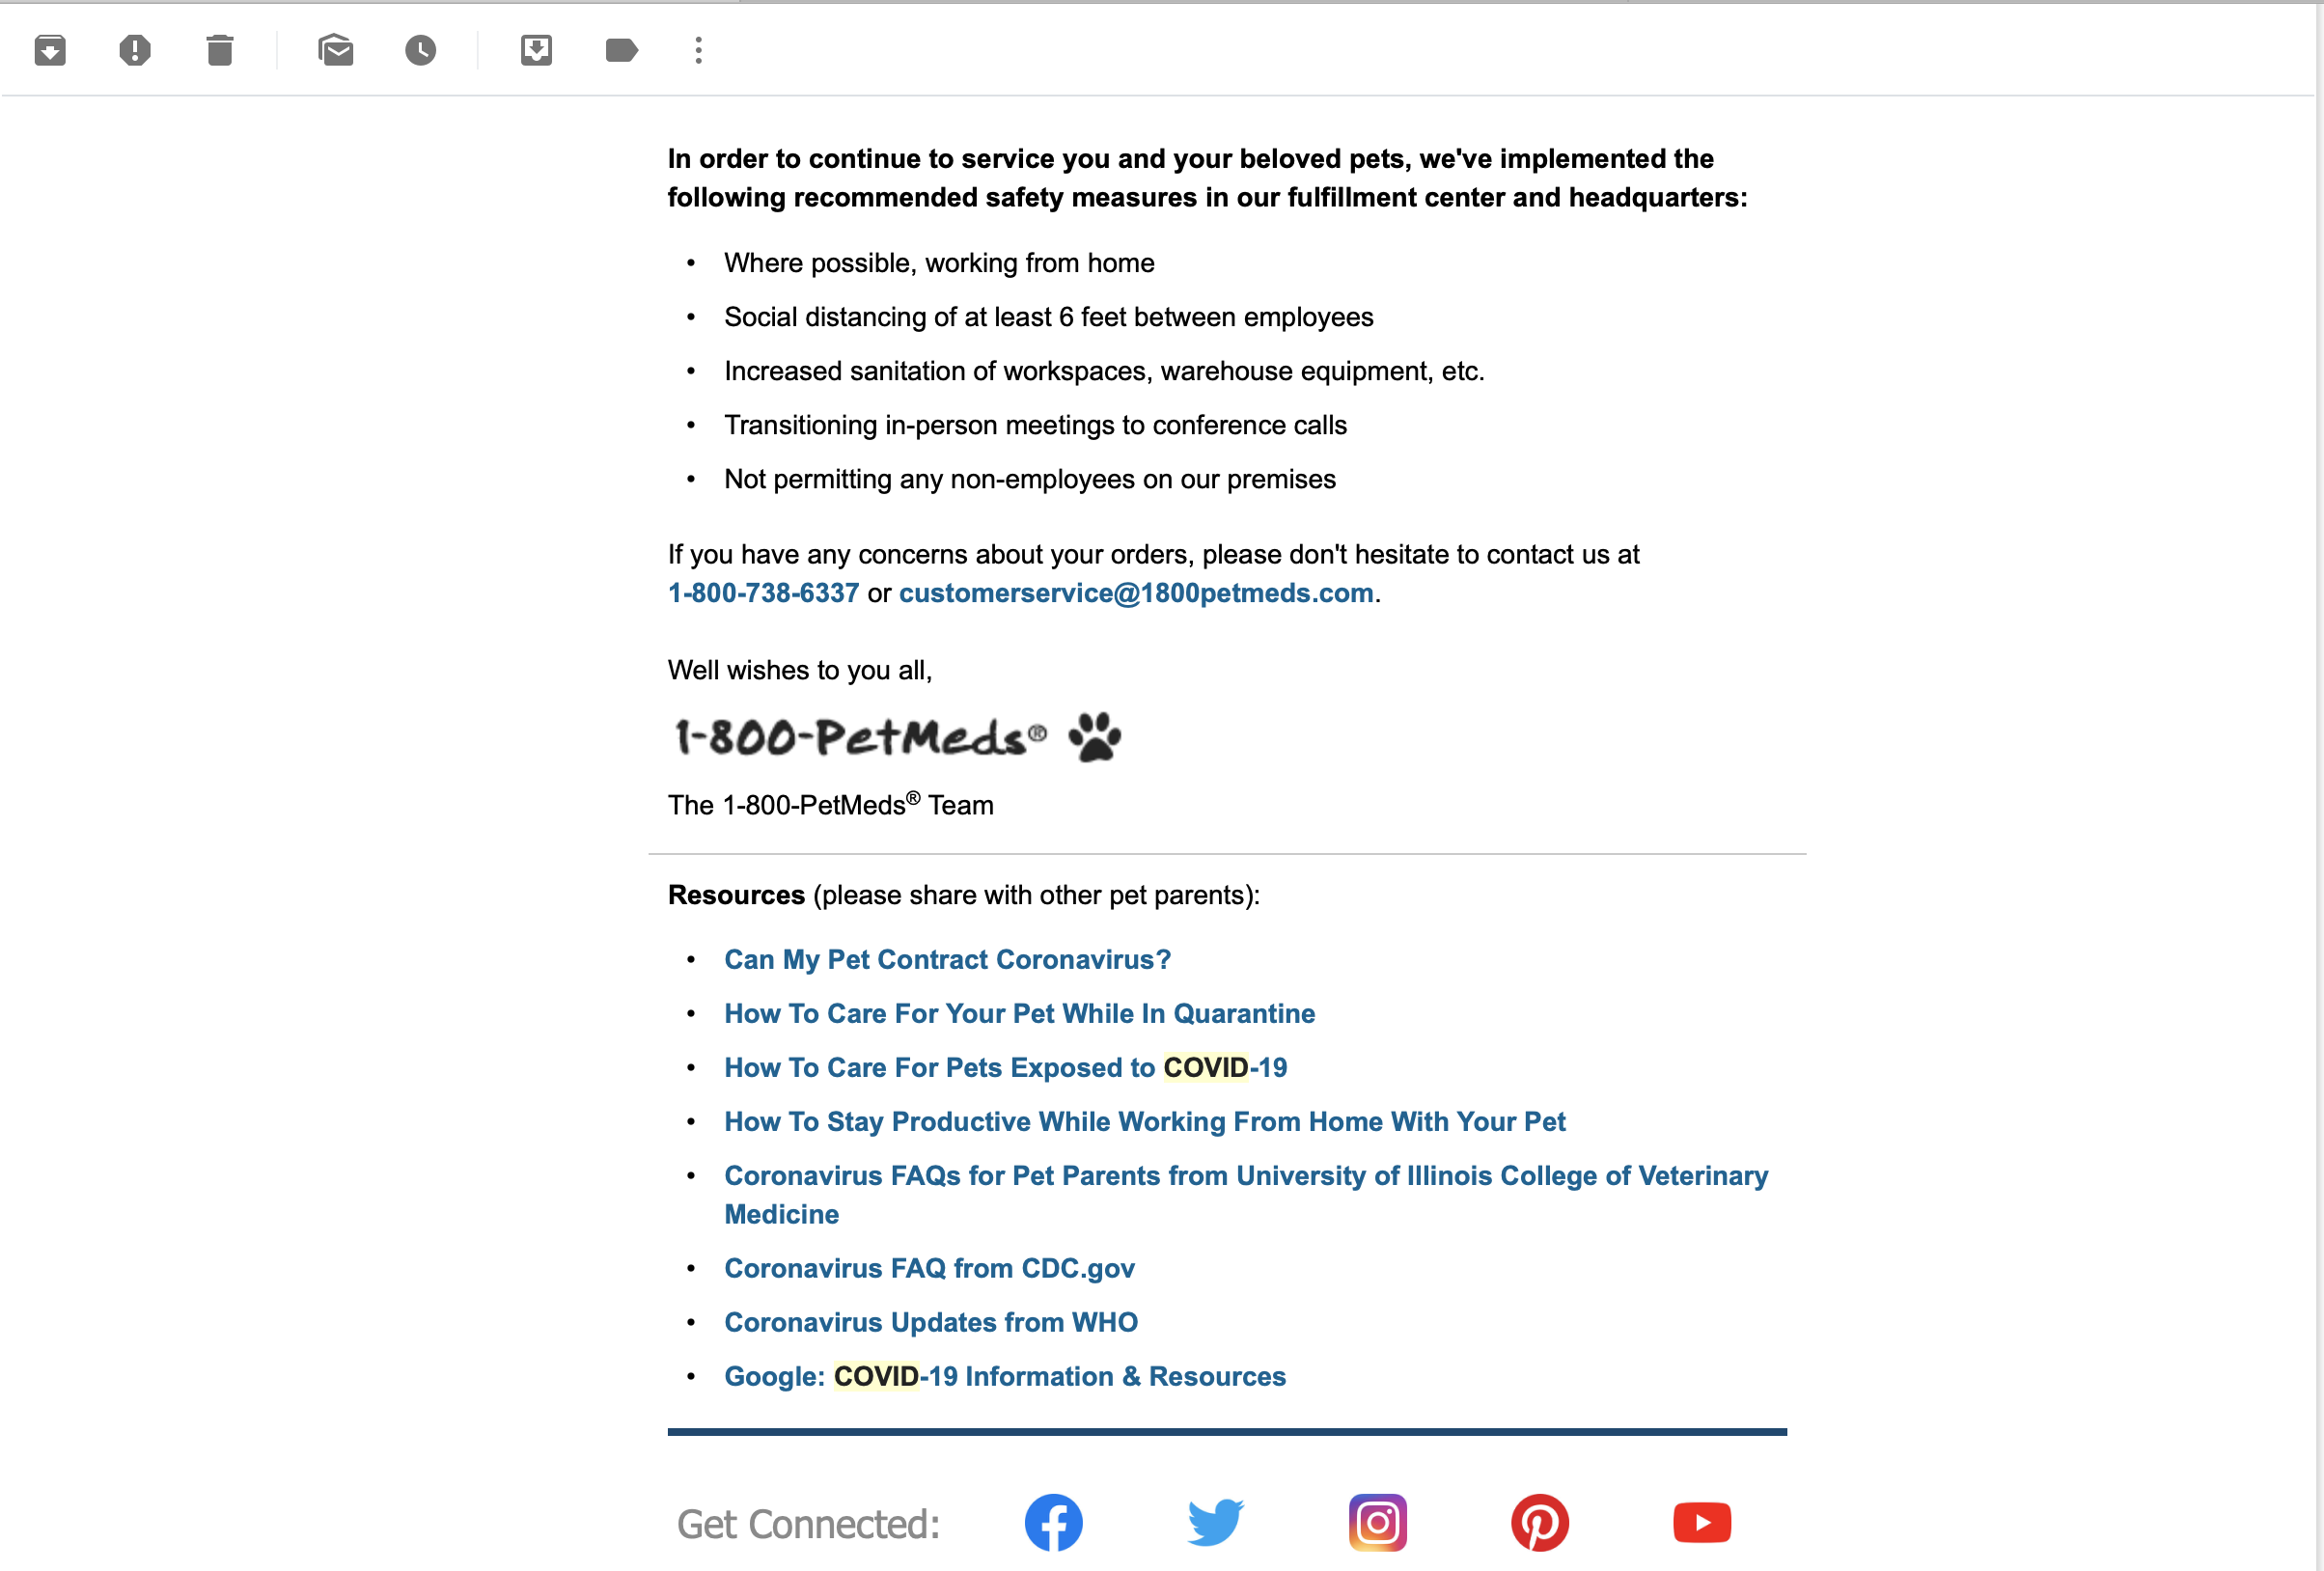 1800PetMeds-Email Resources